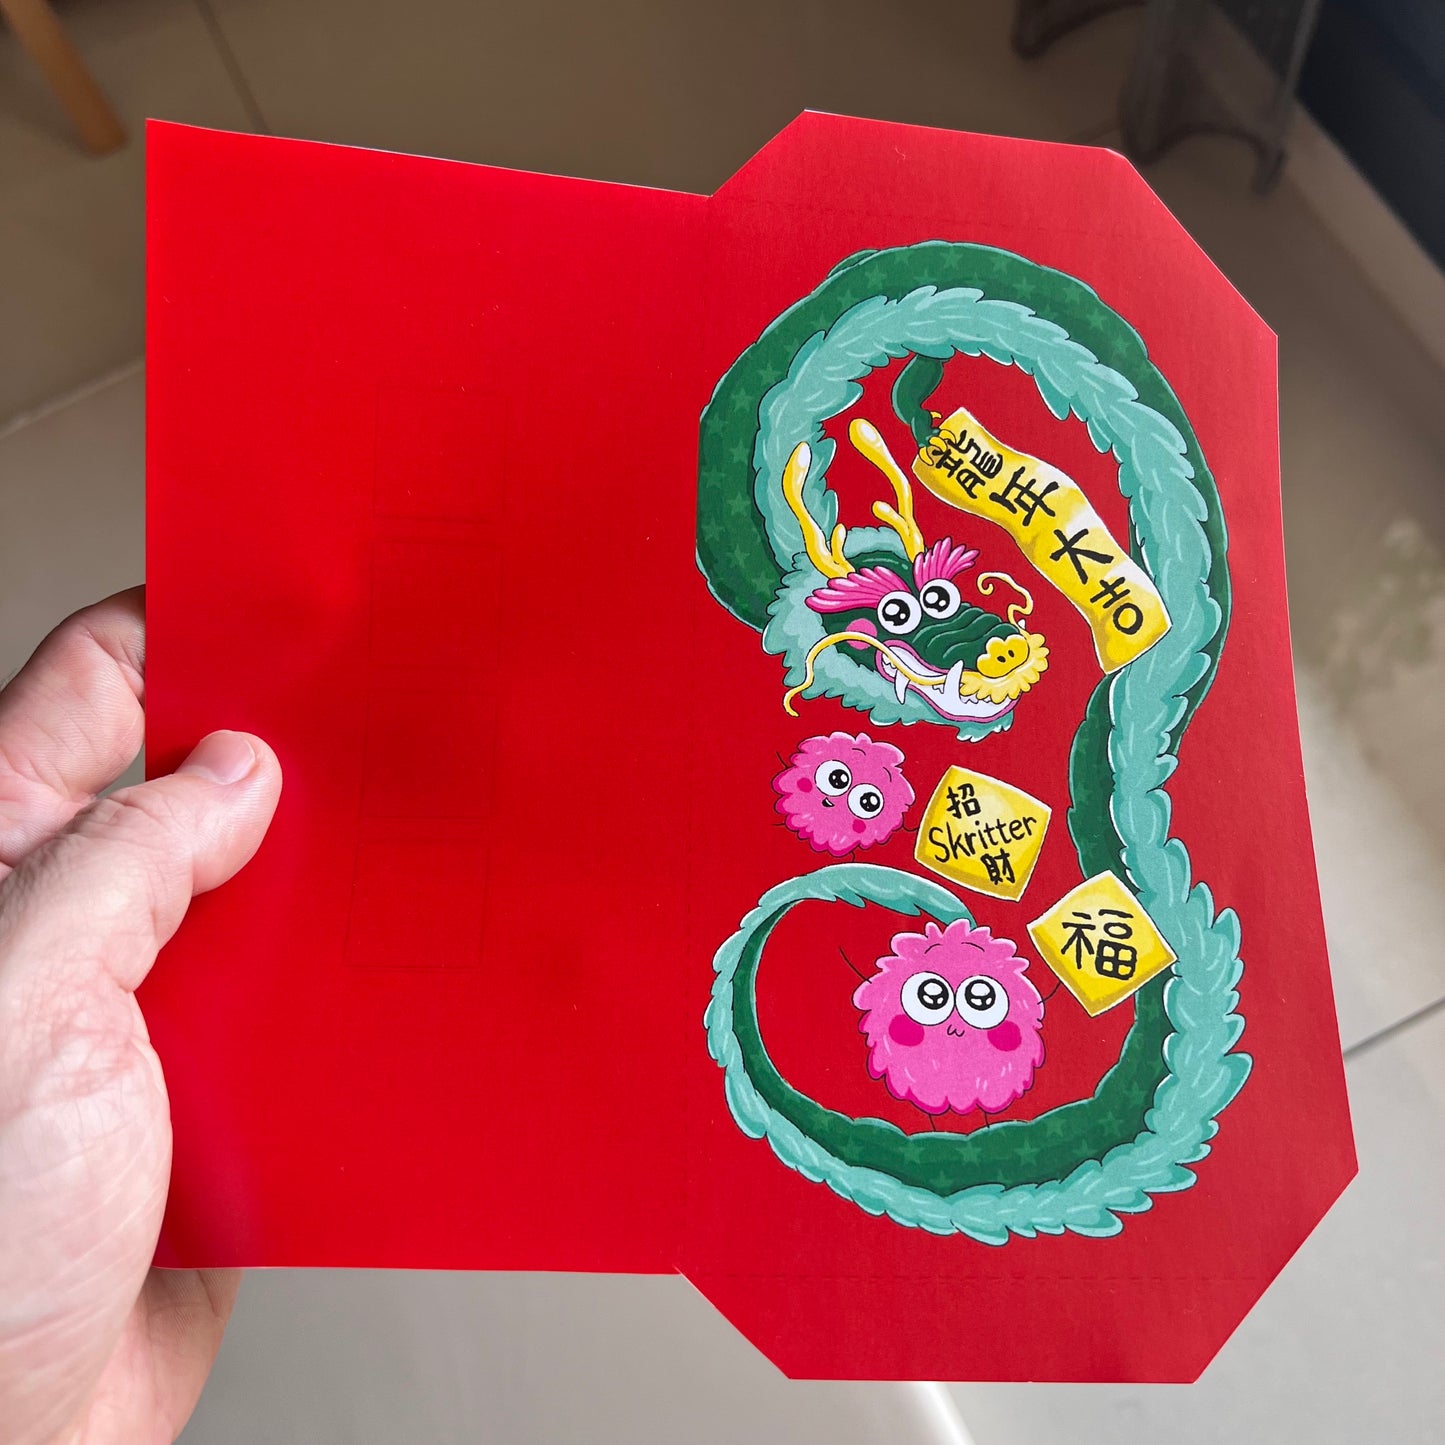 ALL NEW [Digital] Lunar New Year Printable Hongbao (Red Envelope) and Posters